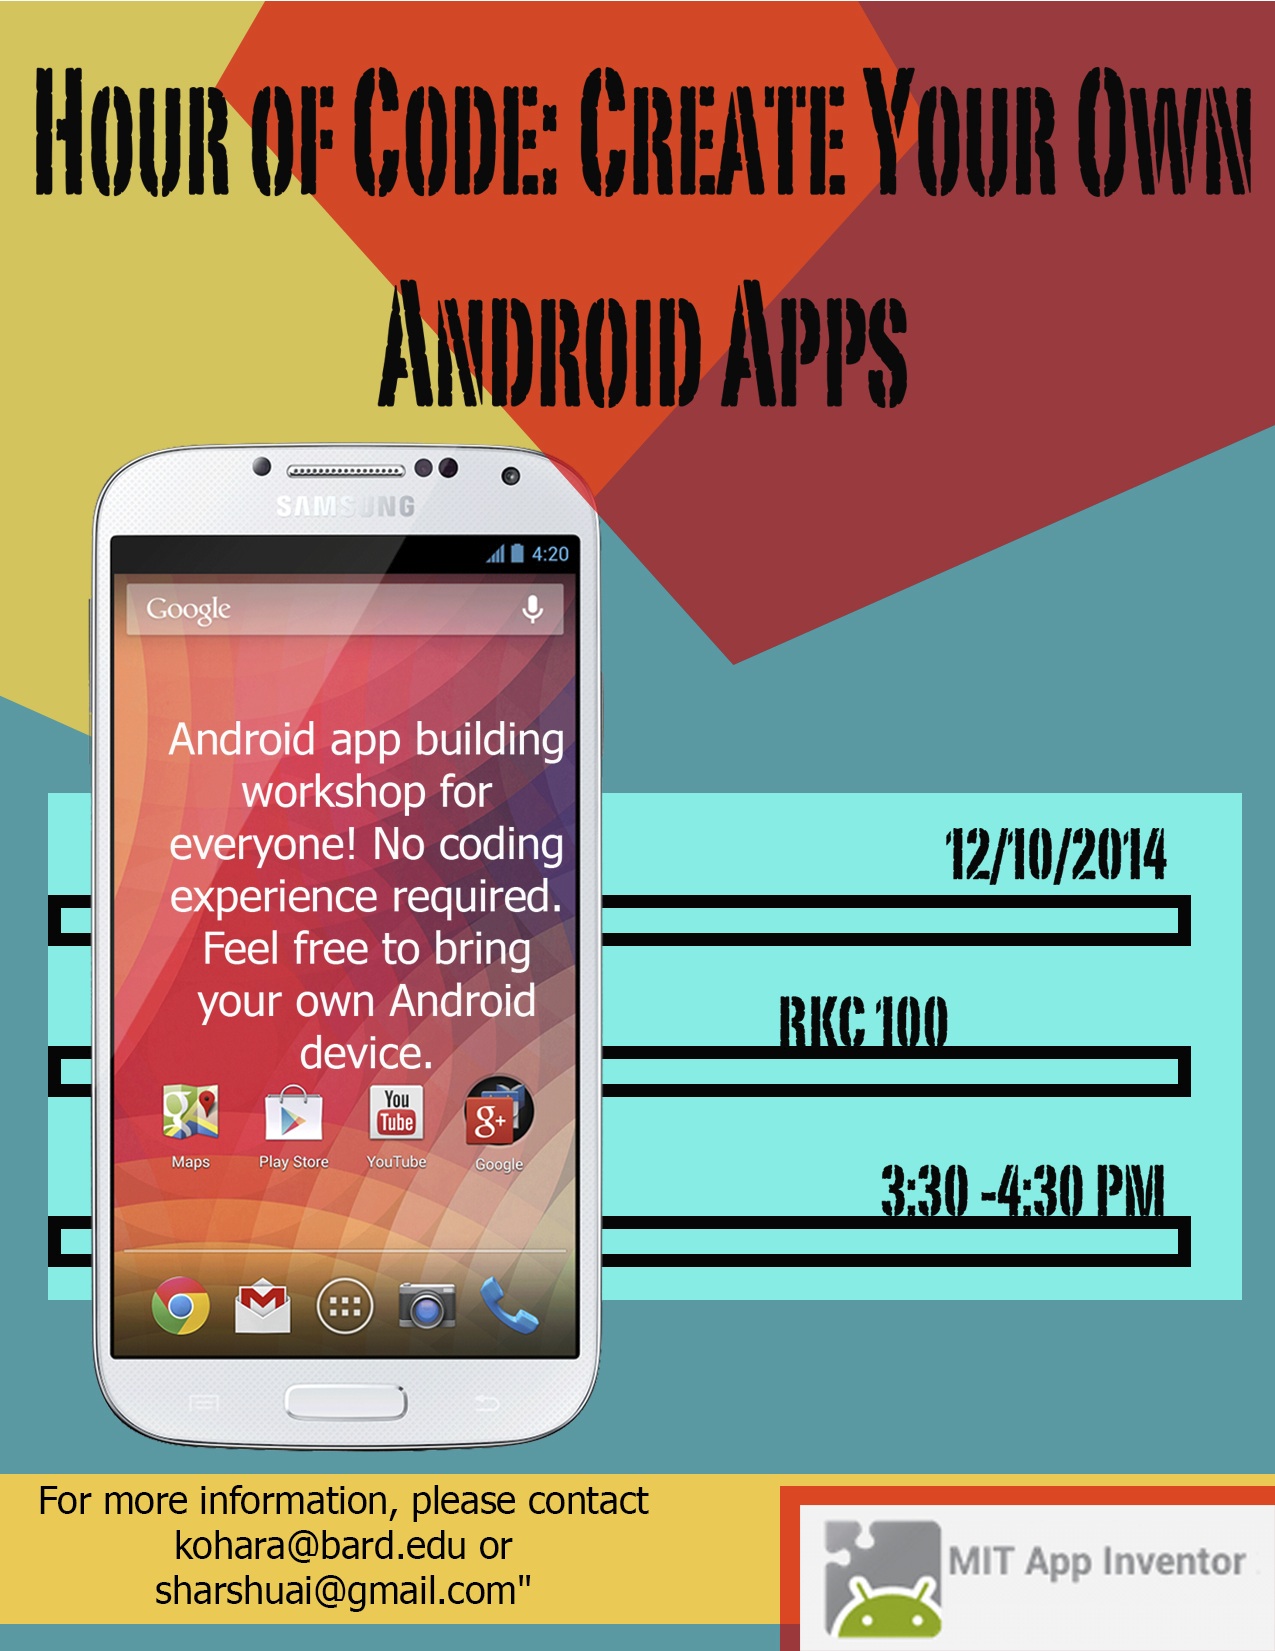 Hour of Code: Create Your Own Android Apps